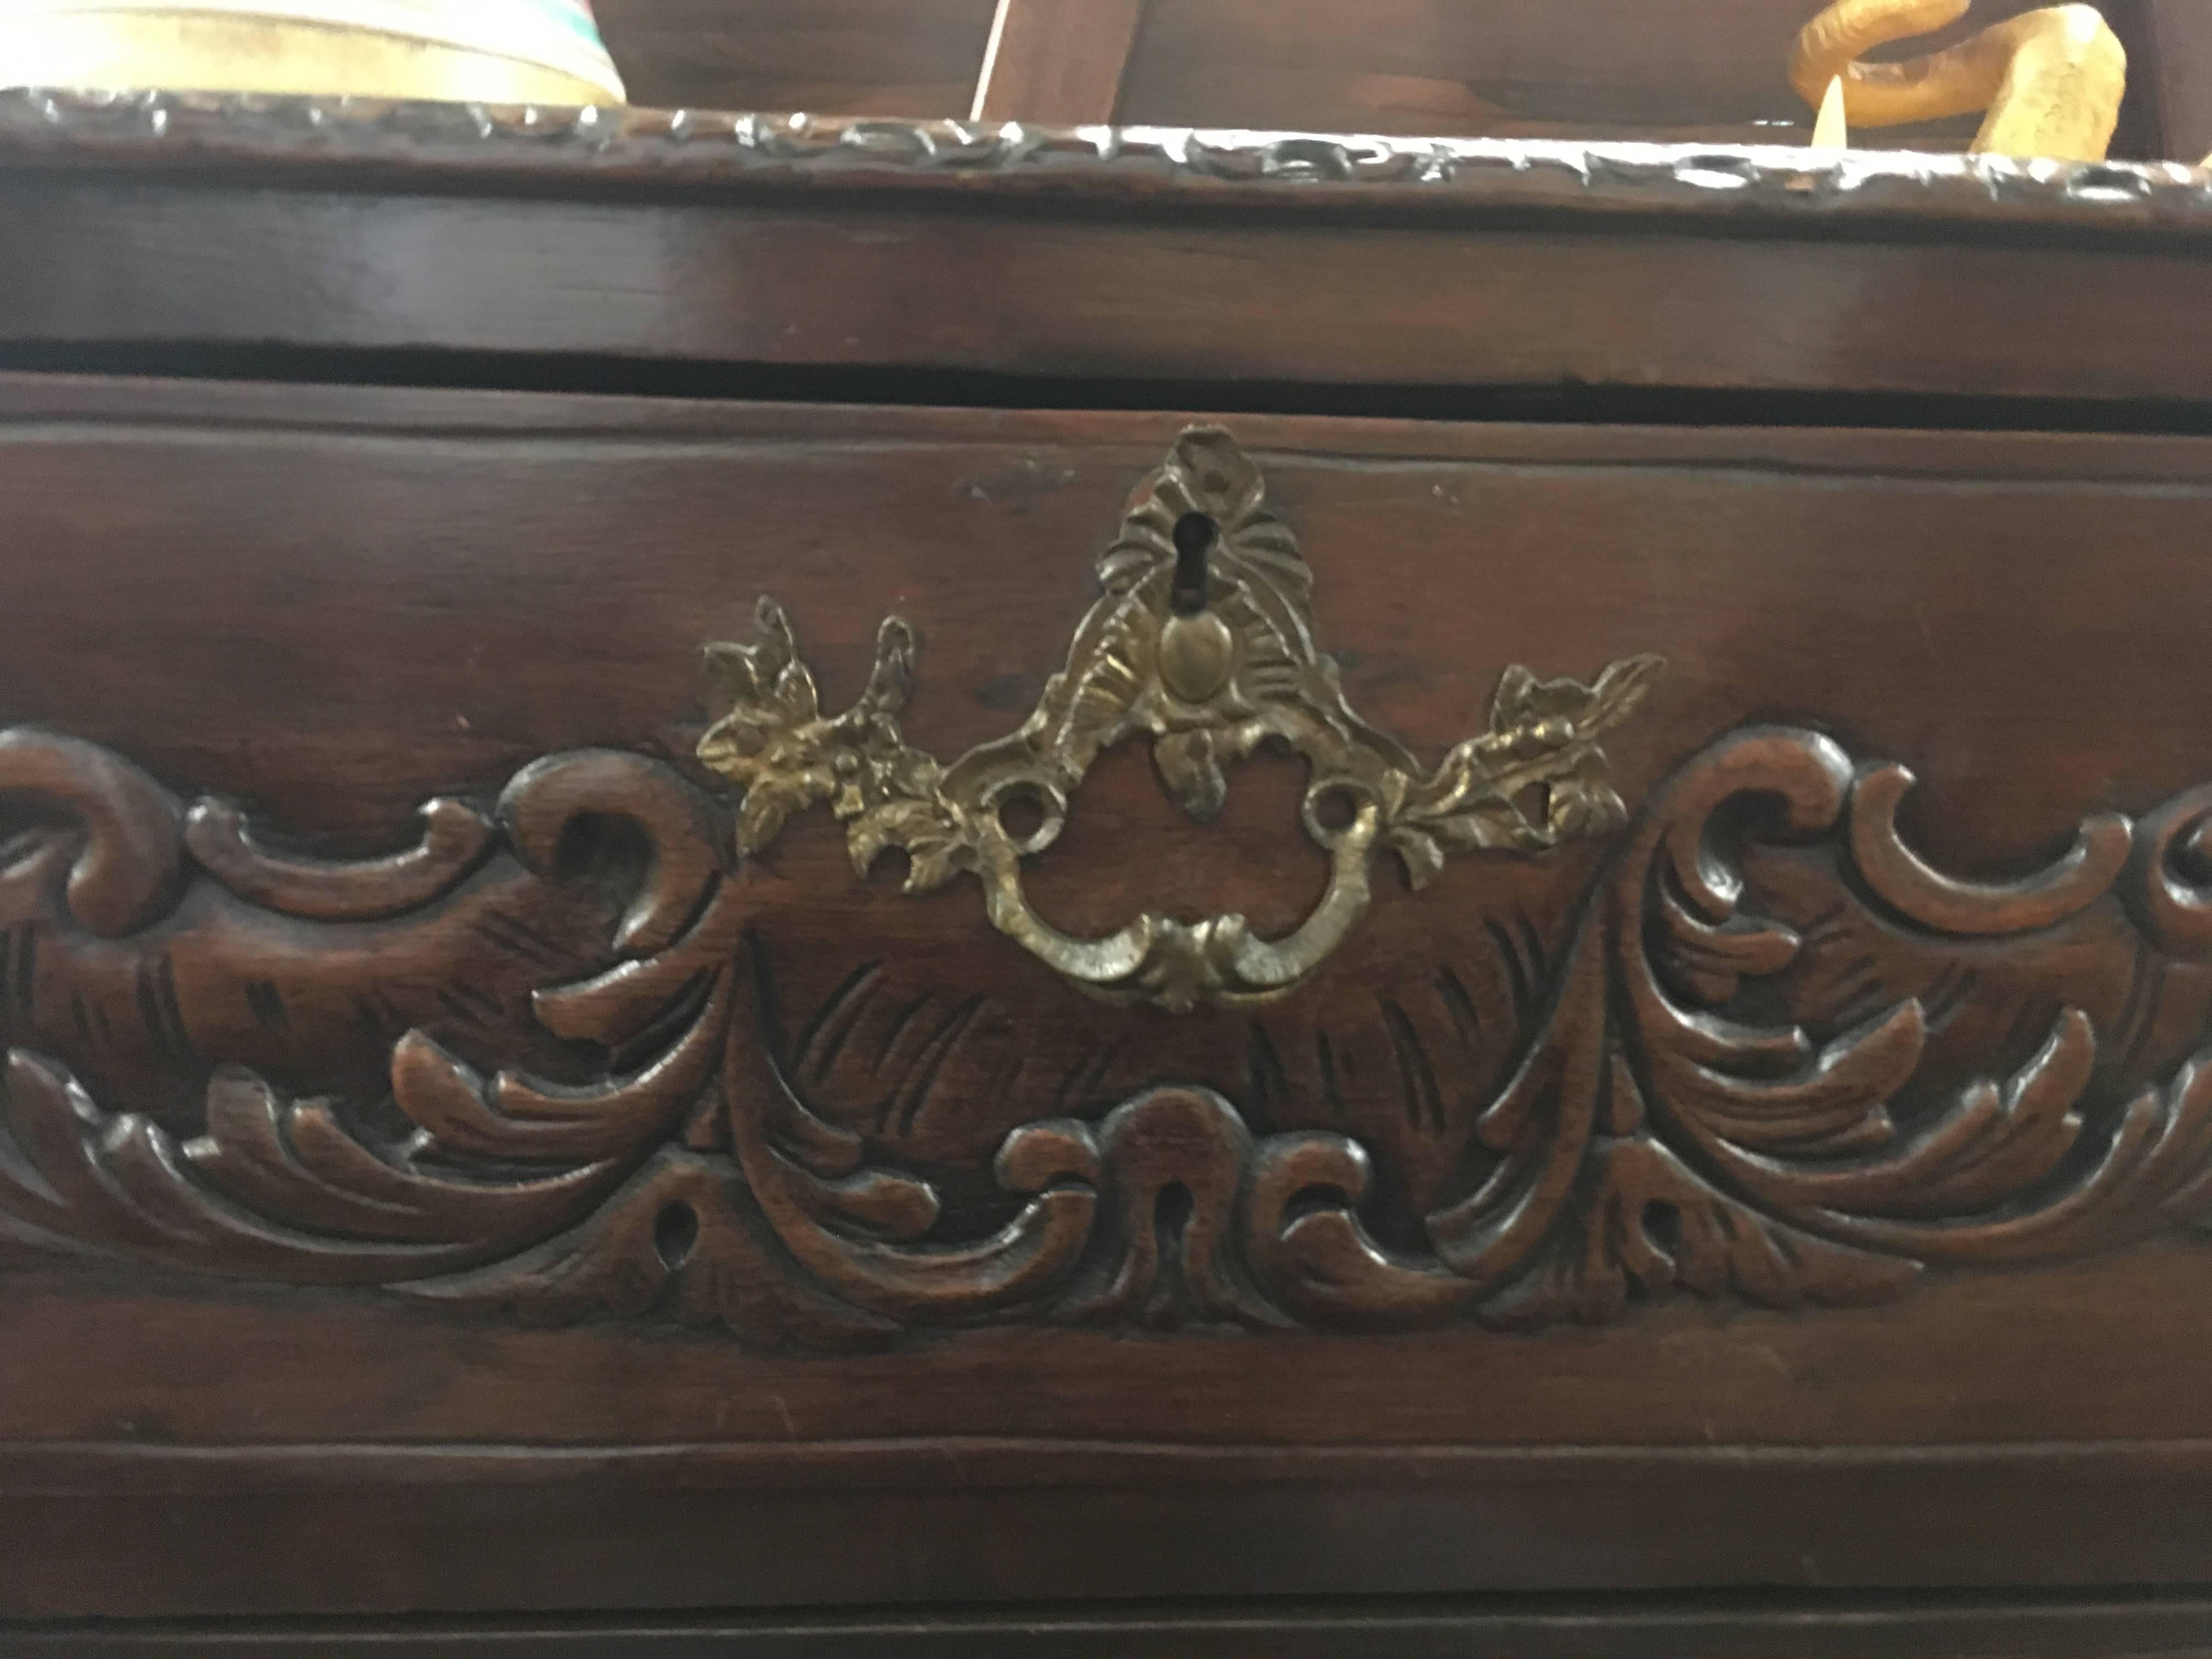 Intricately carved 19th century four-drawer lowboy or dressing table in the Queen Anne style, crafted from hardwood in a rich, deep walnut stain. The unique trapezoid-shaped top with a decoratively carved edge is 23